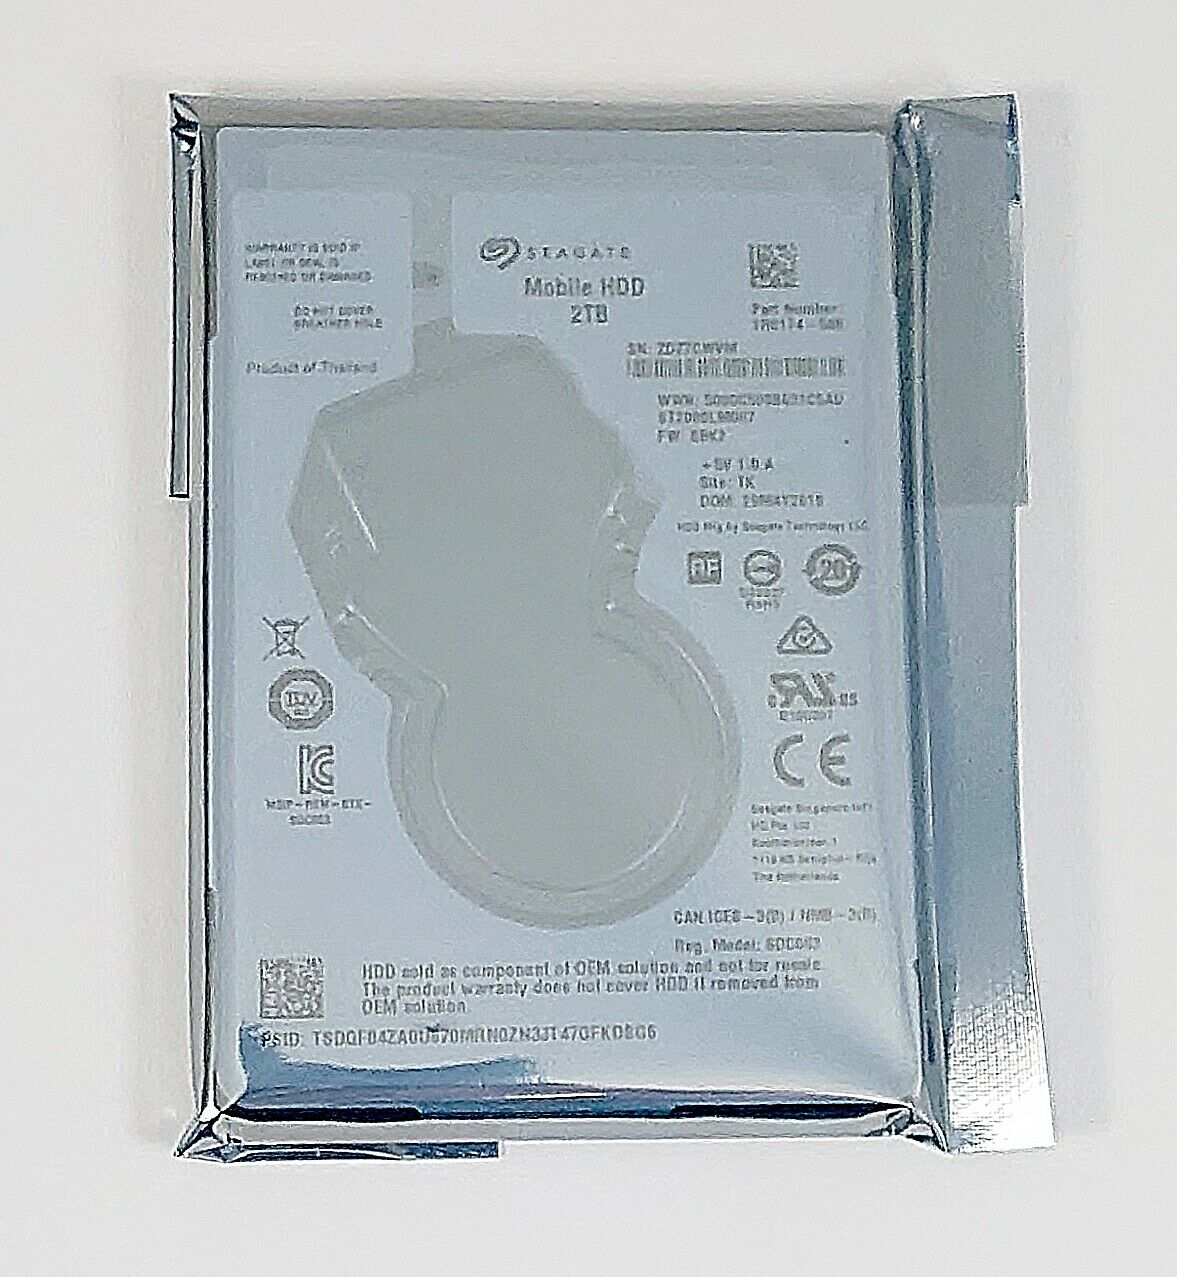 Seagate Mobile St2000lm007 2 Tb 2.5" Sata 6gb/s Laptop Ps4  Hard Drive 7mm Oem